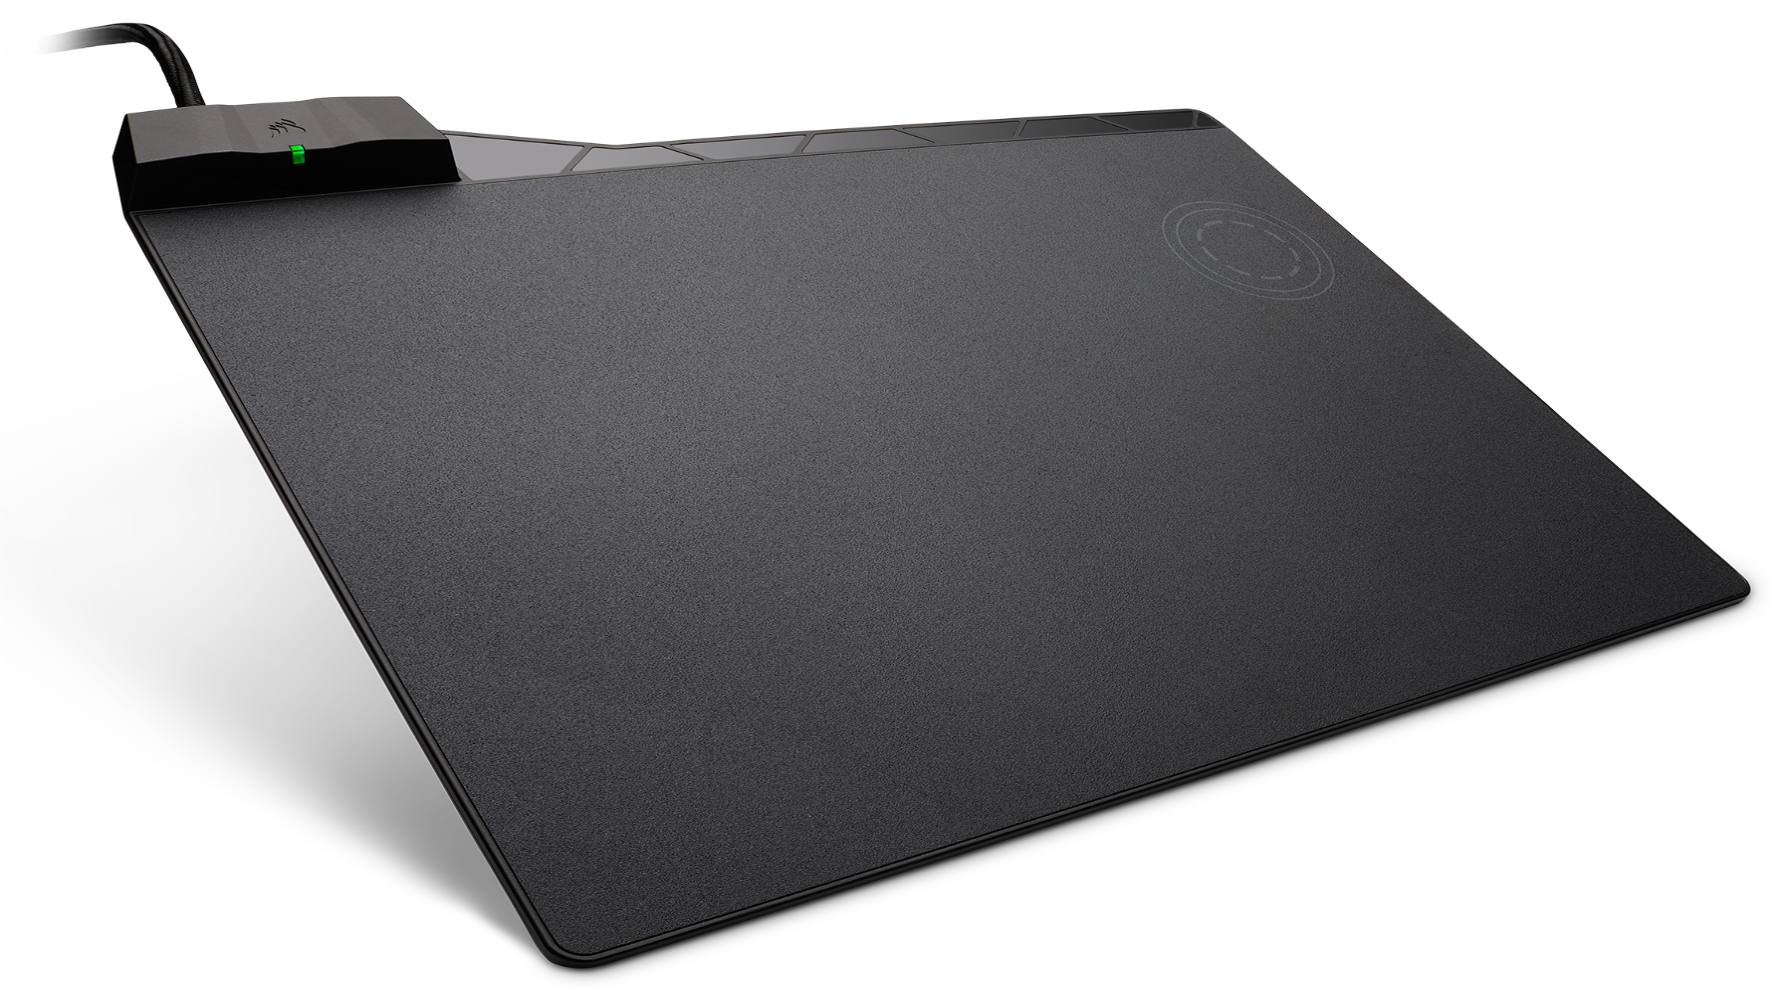 Best gaming mouse pads 2019: the best mouse mats for gamers 6